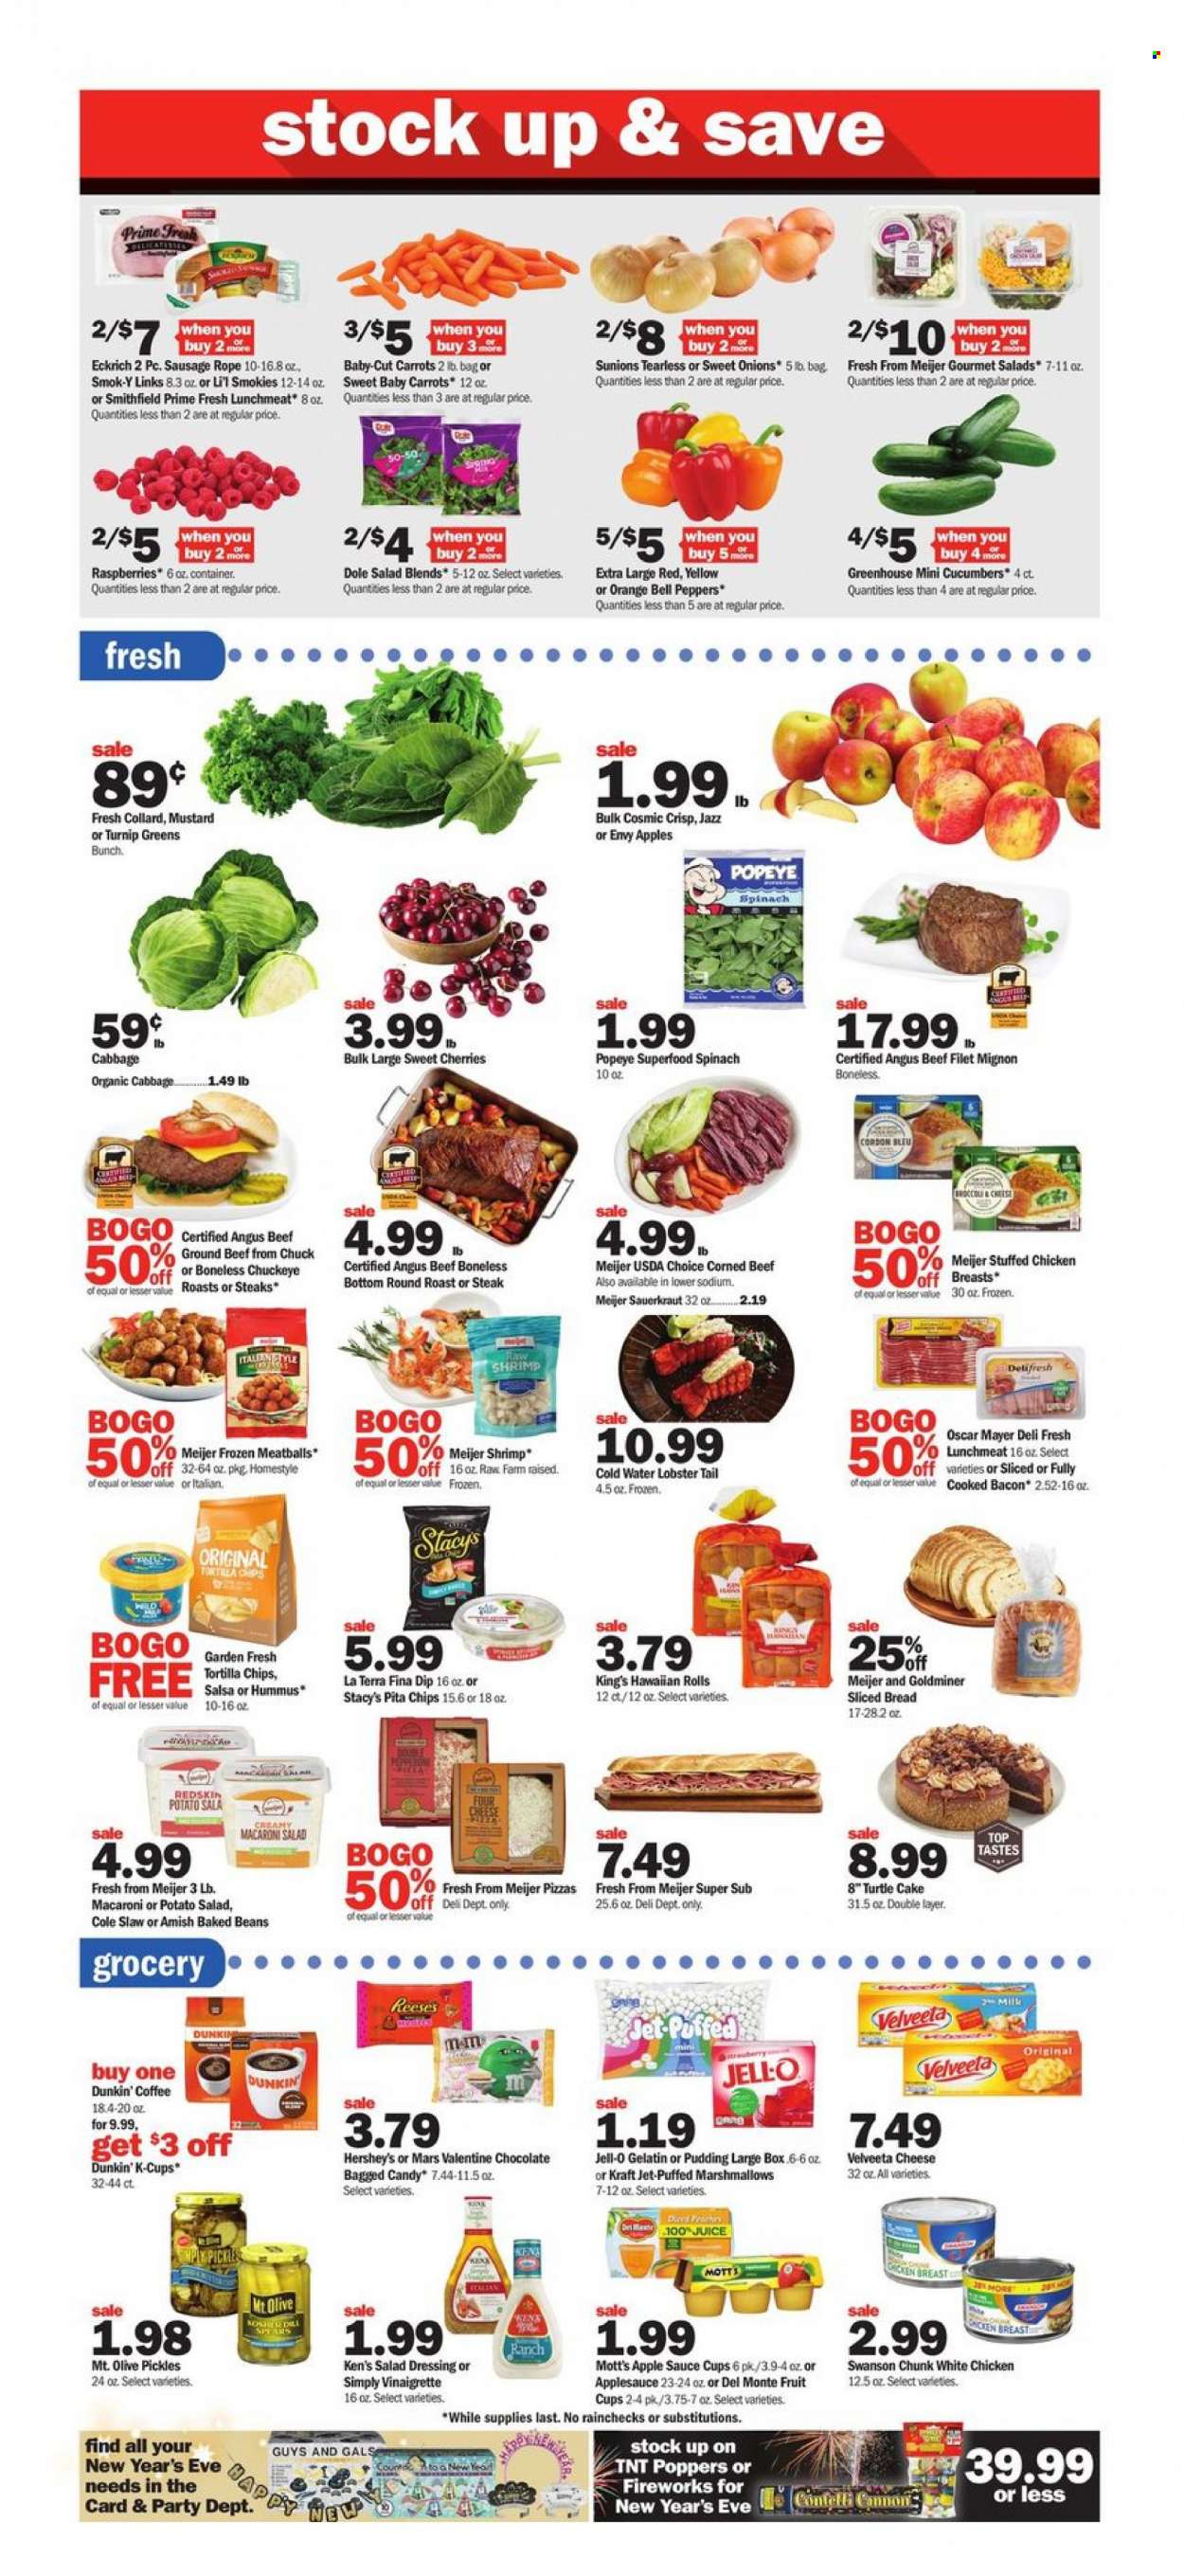 thumbnail - Meijer Flyer - 12/26/2021 - 01/01/2022 - Sales products - fruit cup, bread, cake, hawaiian rolls, bell peppers, cabbage, carrots, cucumber, Dole, peppers, oranges, Mott's, lobster, lobster tail, shrimps, pizza, meatballs, sauce, Kraft®, stuffed chicken, bacon, Oscar Mayer, sausage, hummus, potato salad, macaroni salad, lunch meat, corned beef, pudding, milk, dip, Reese's, Hershey's, marshmallows, chocolate, Mars, tortilla chips, pita chips, Jell-O, sauerkraut, pickles, baked beans, mustard, salad dressing, vinaigrette dressing, dressing, salsa, apple sauce, juice, coffee, coffee capsules, K-Cups, chicken breasts, beef meat, ground beef, steak, beef tenderloin, round roast, Jet, container, sauce cup, gelatin. Page 2.